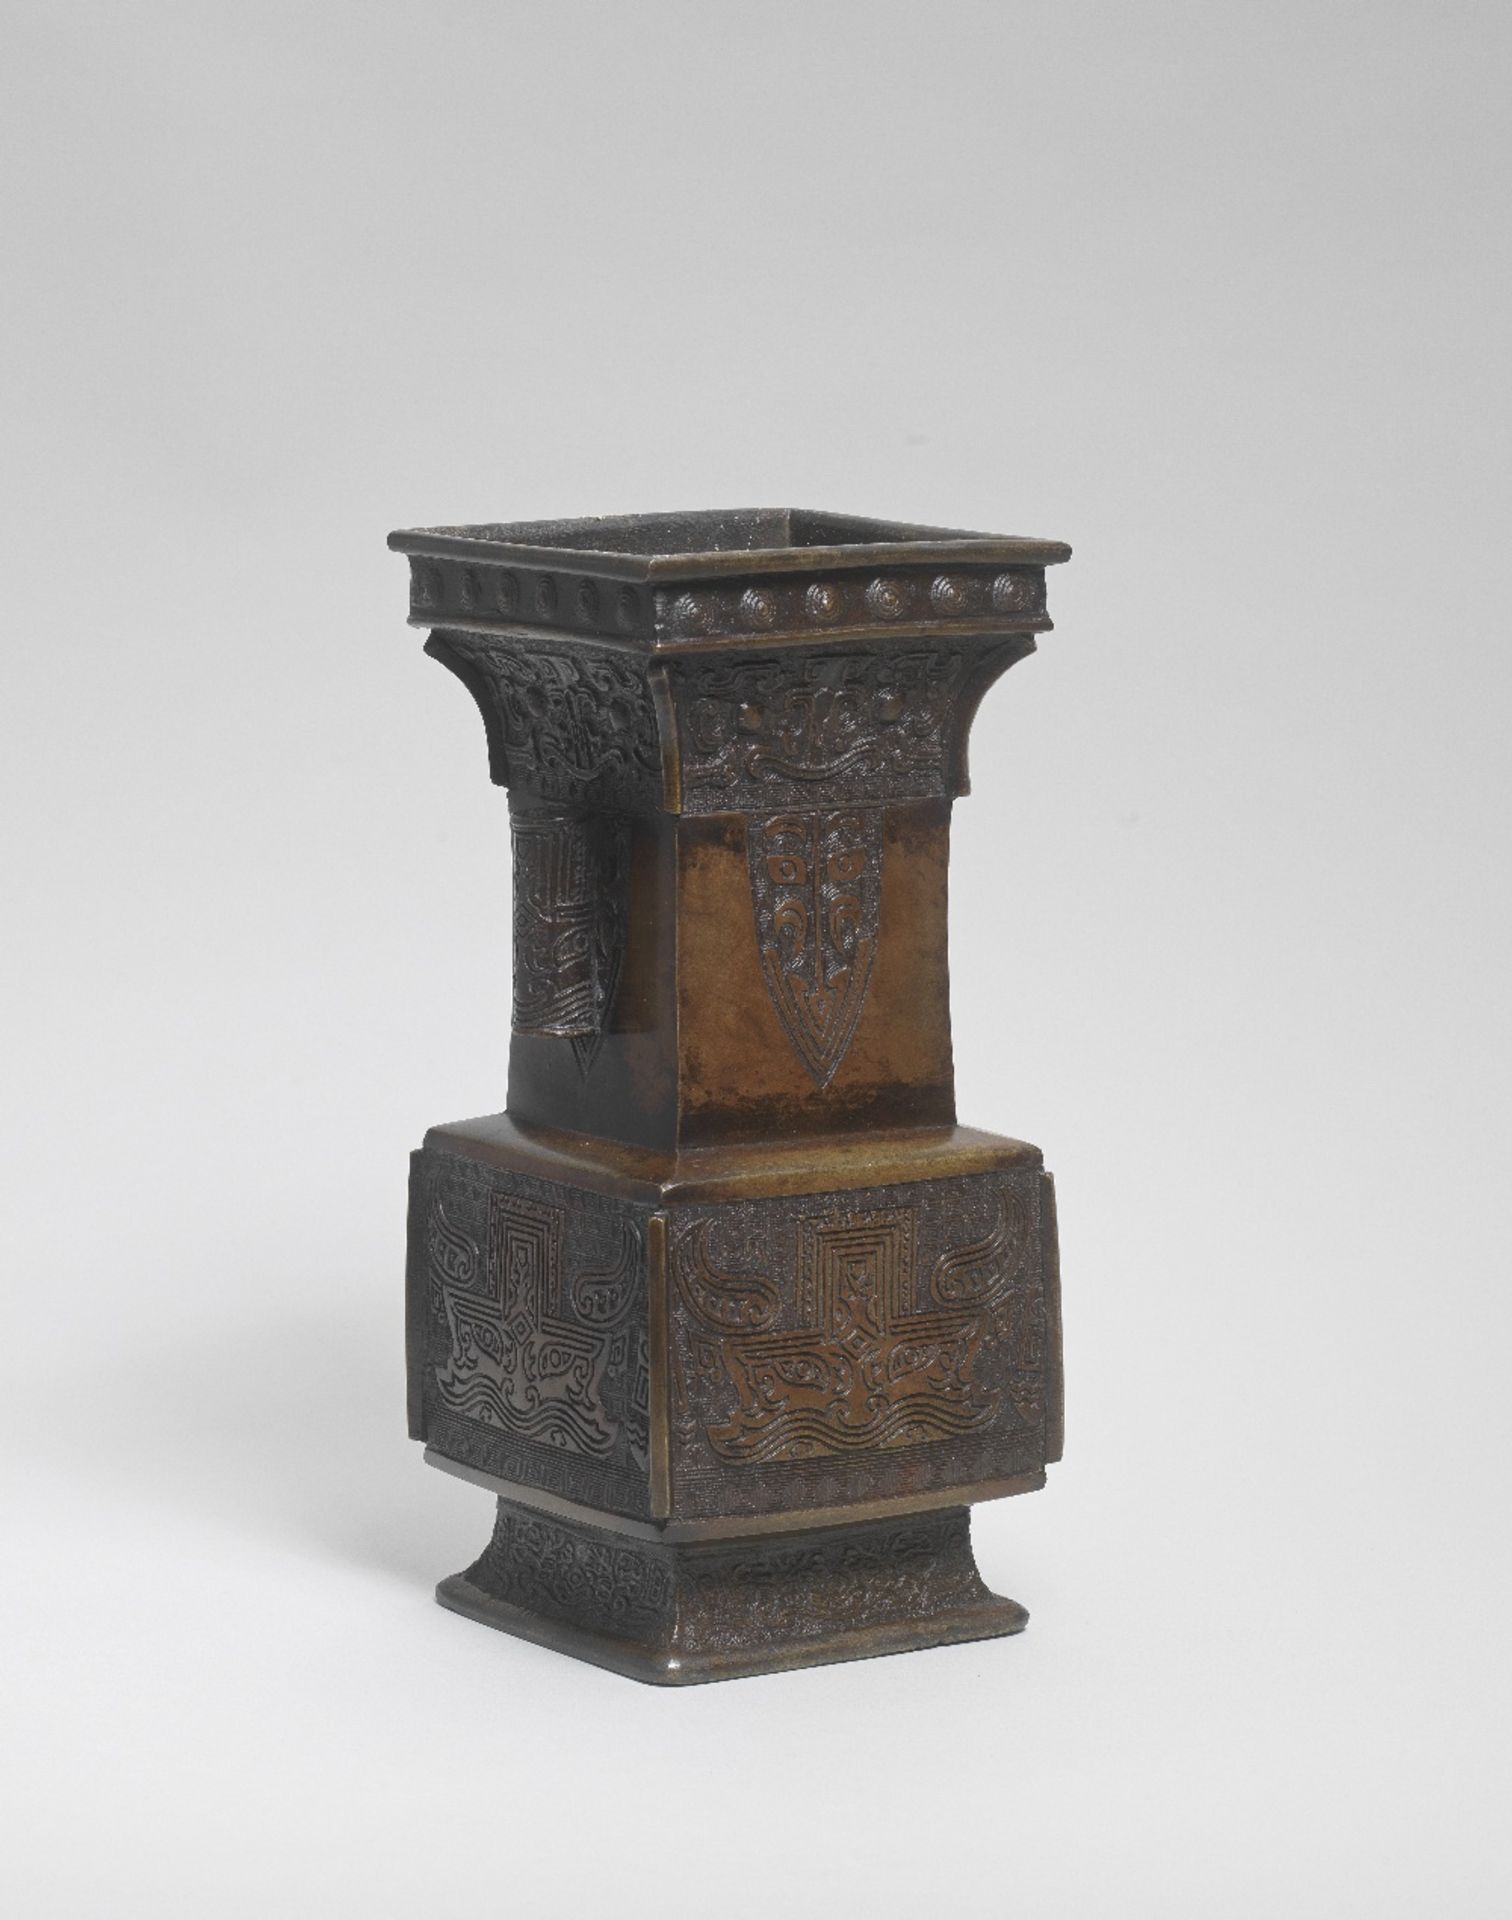 AN ARCHAISTIC BRONZE SQUARE VASE, FANGZUN Wanli seal mark, Qing Dynasty or earlier (2)